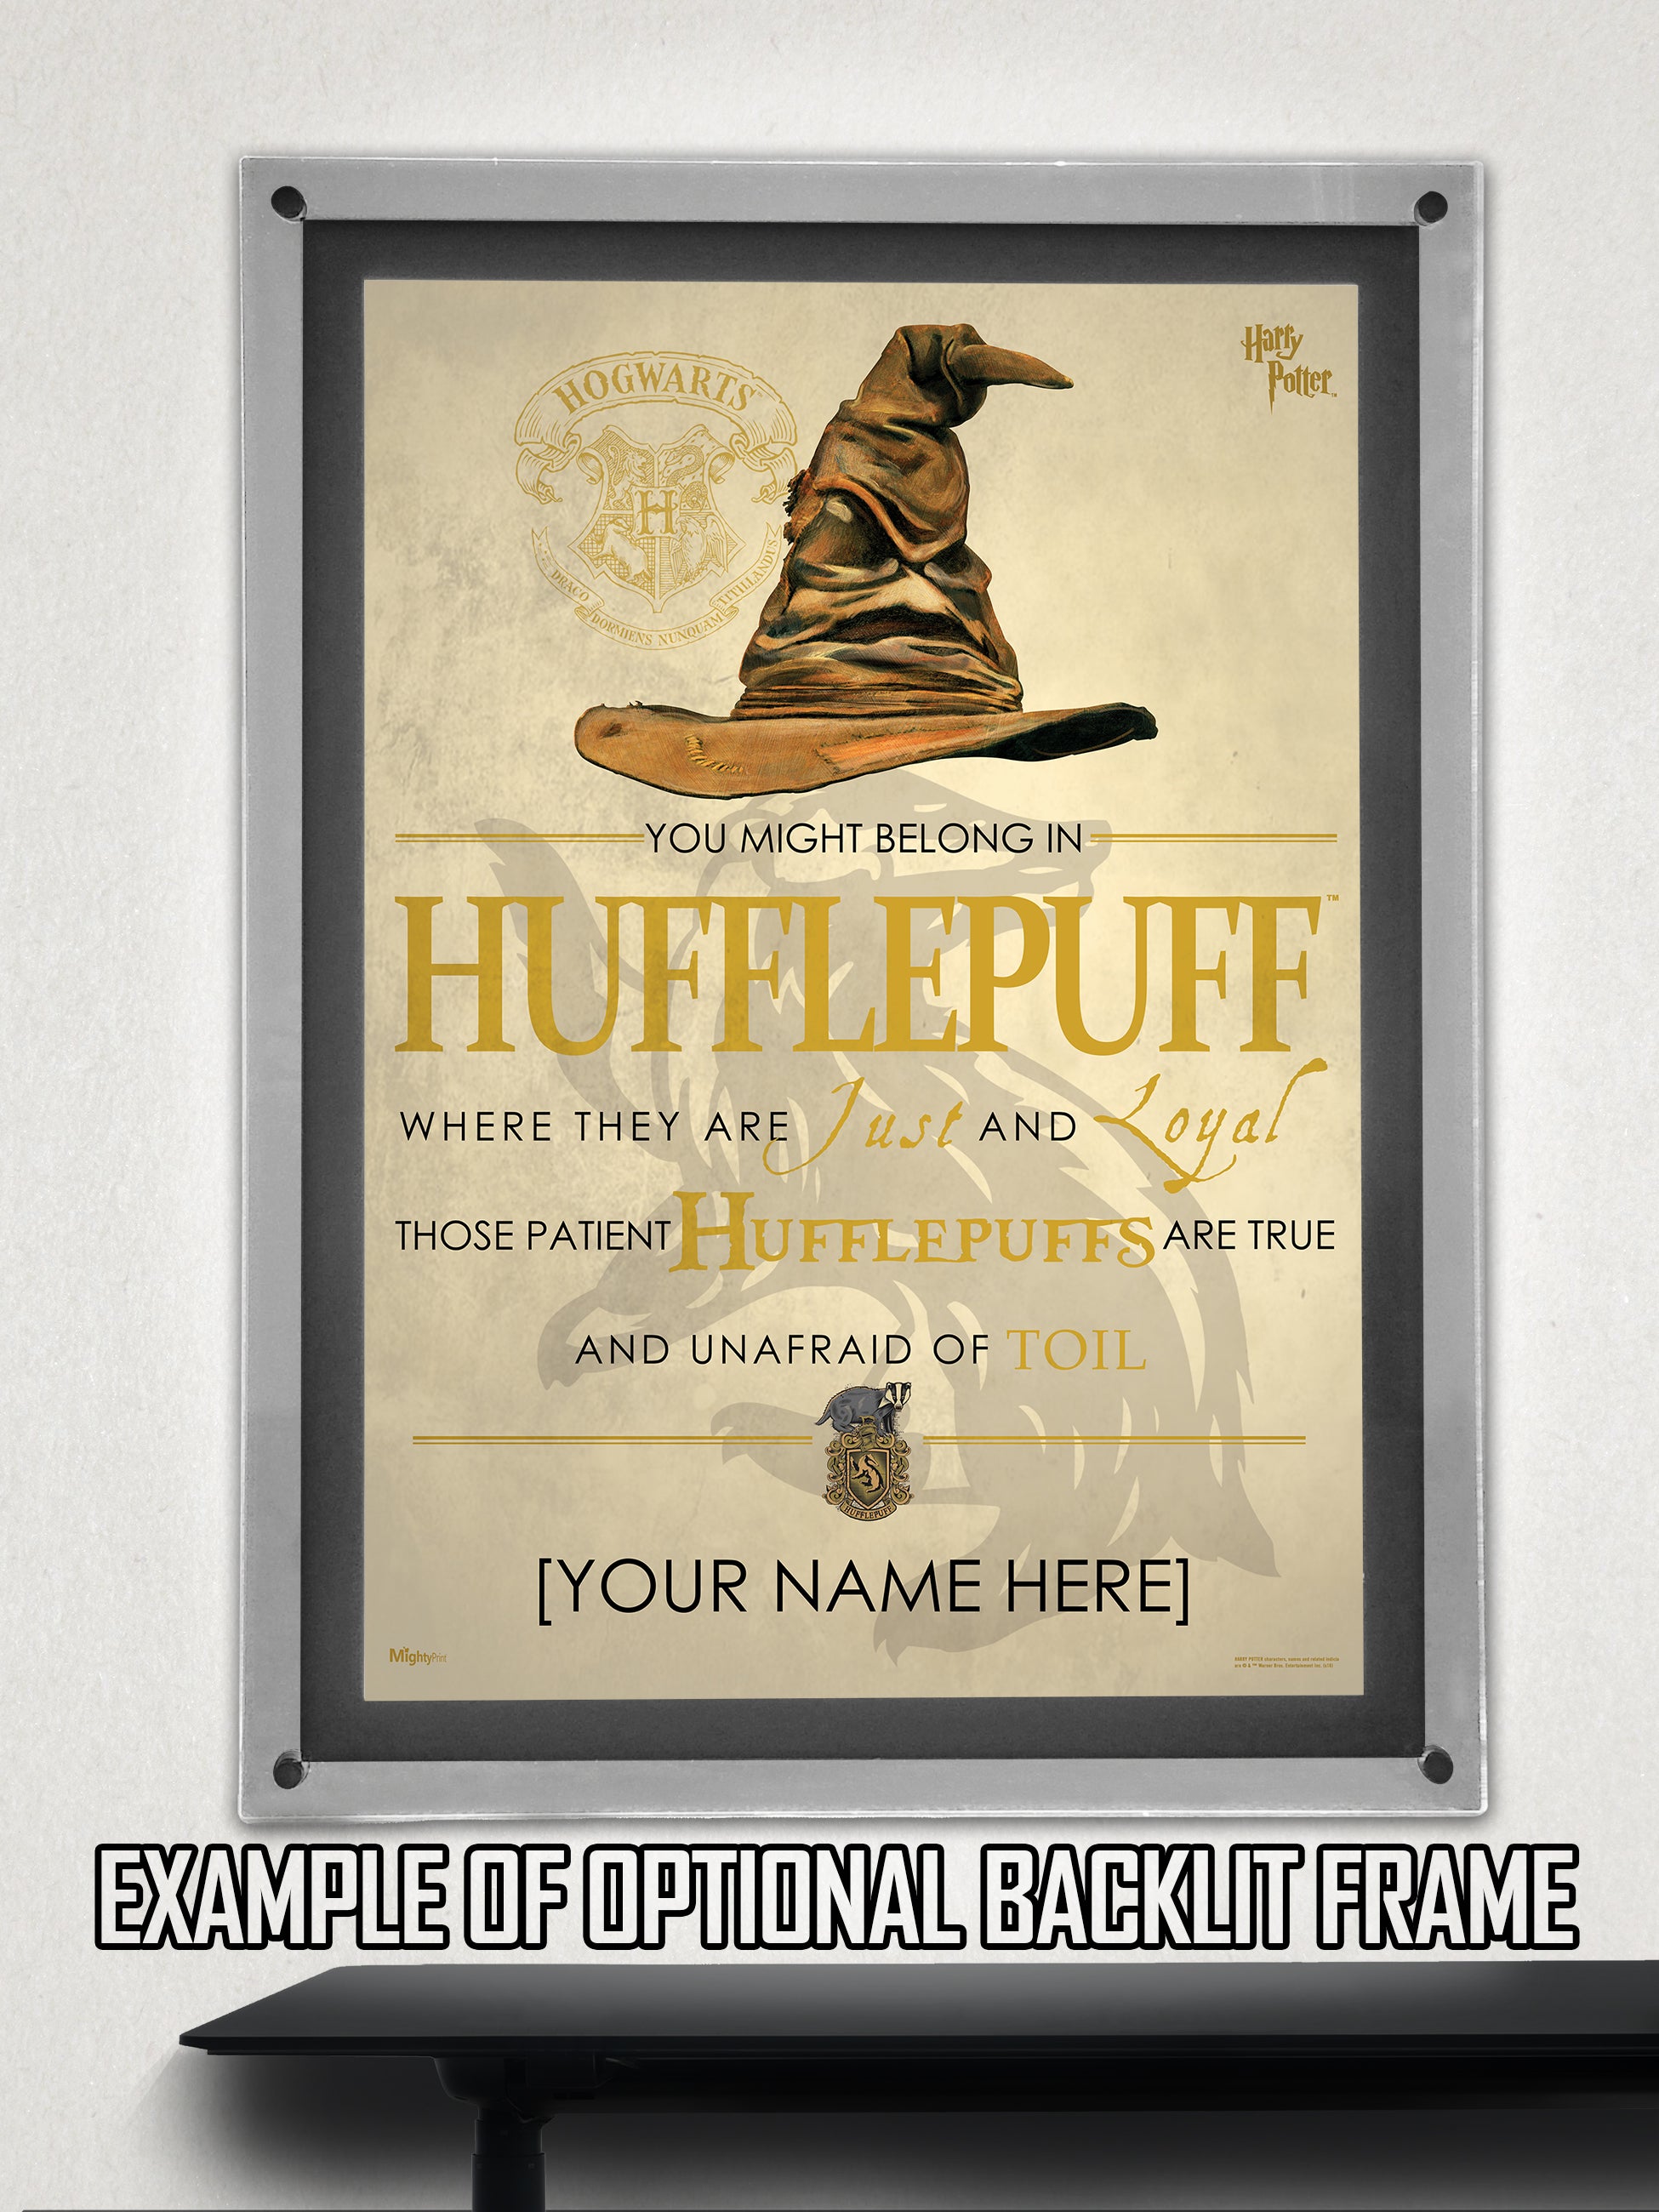 Harry Potter (Hufflepuff Sorting Hat Poem - Personalize with Name) MightyPrint Wall Art